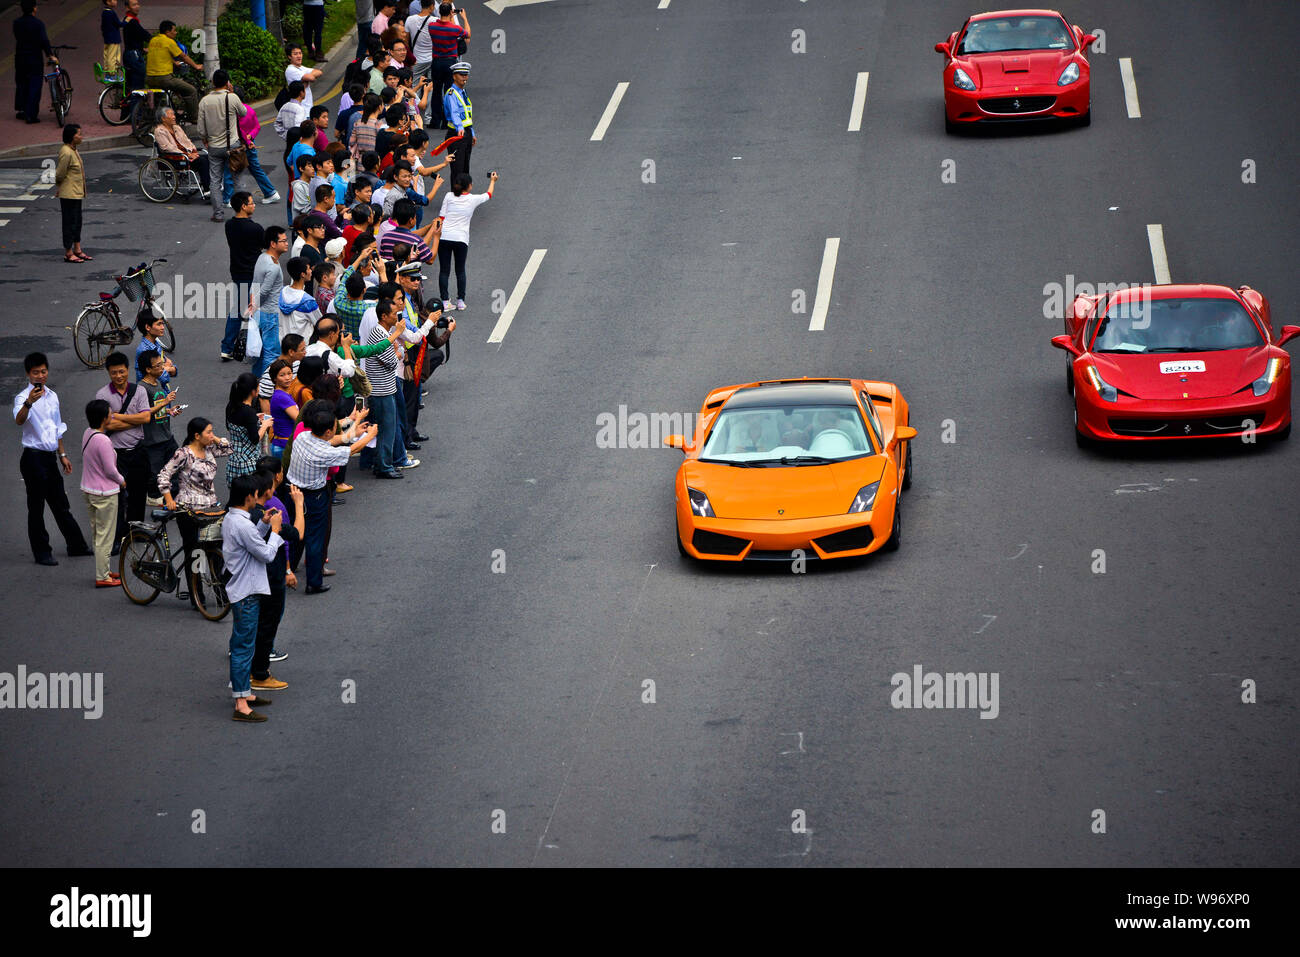 Onlookers take photos of Ferrari sports cars travelling on the road during a parade to celebrate the 20th anniversary of Ferraris presence in China, i Stock Photo